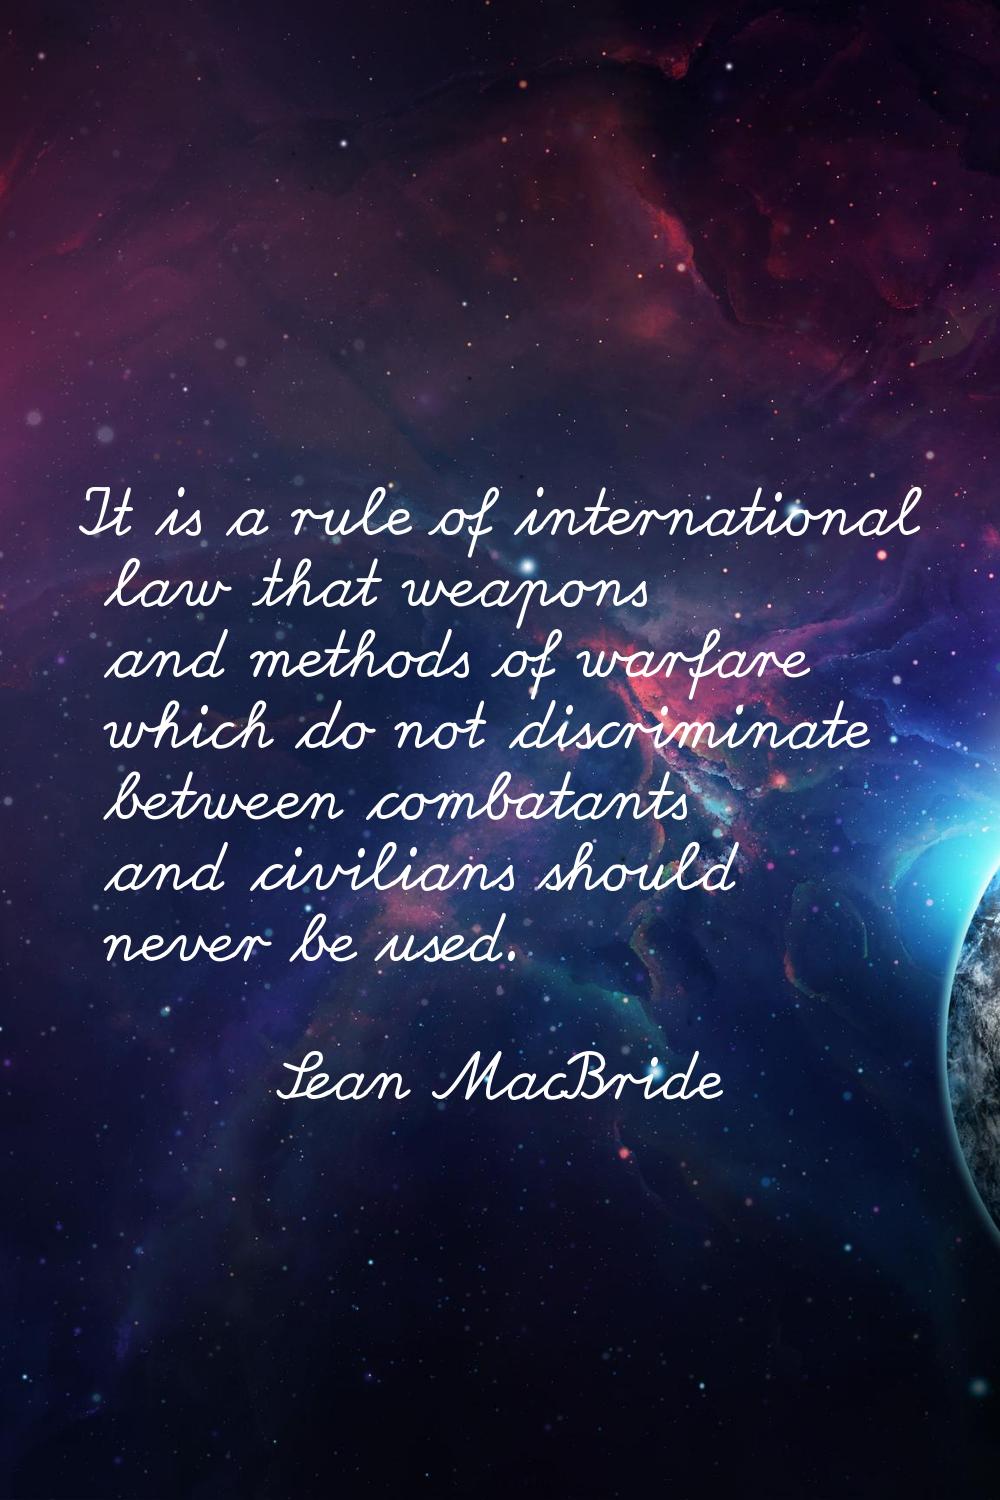 It is a rule of international law that weapons and methods of warfare which do not discriminate bet